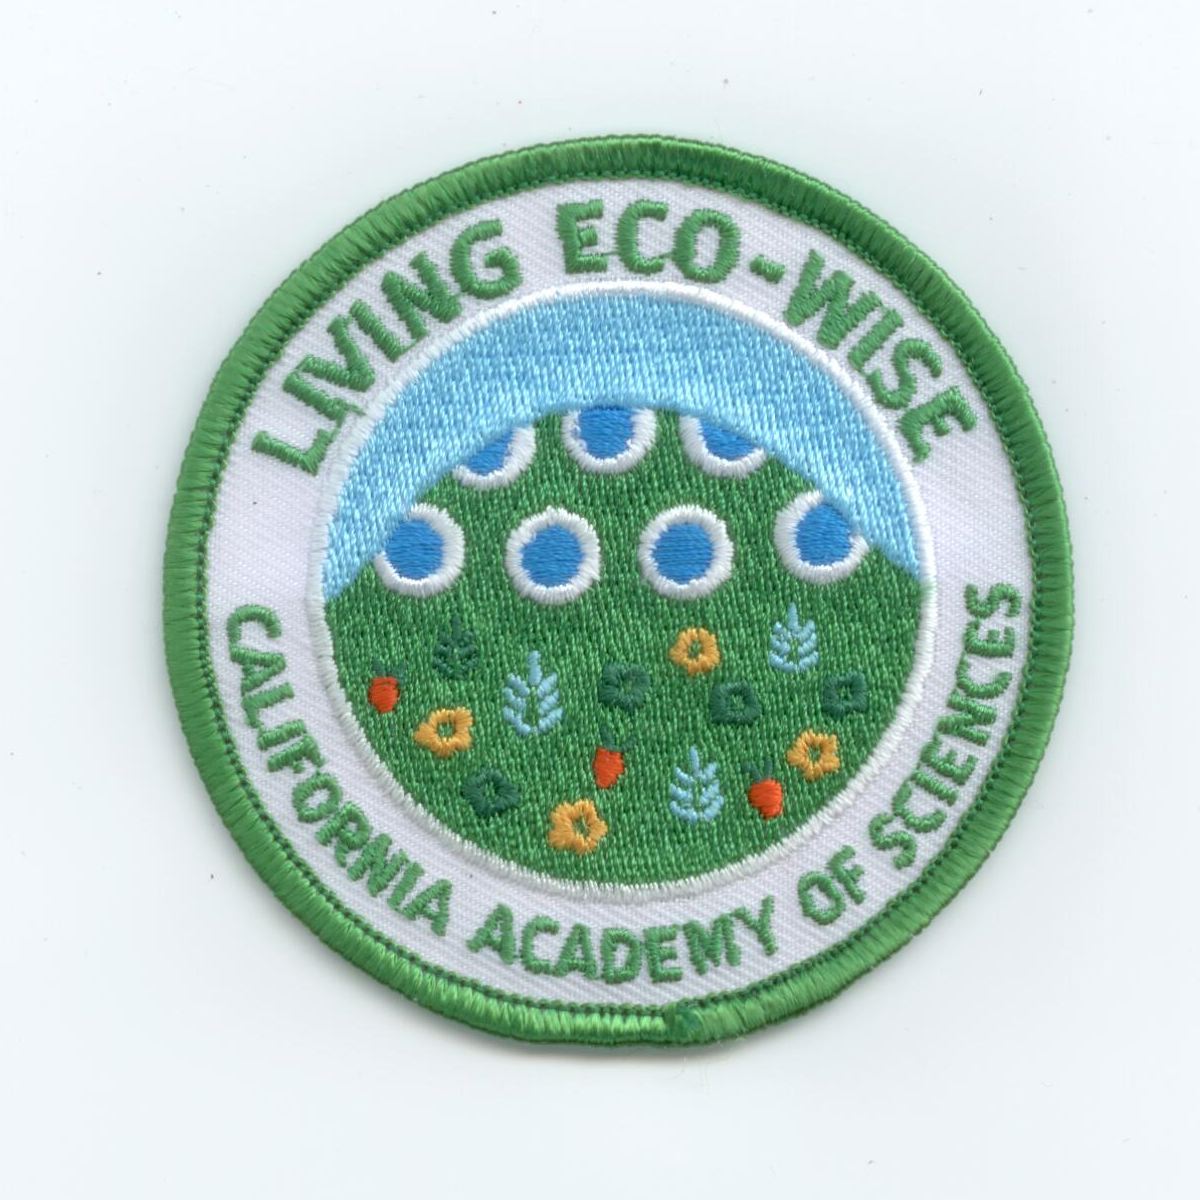 Living Eco-Wise Patch